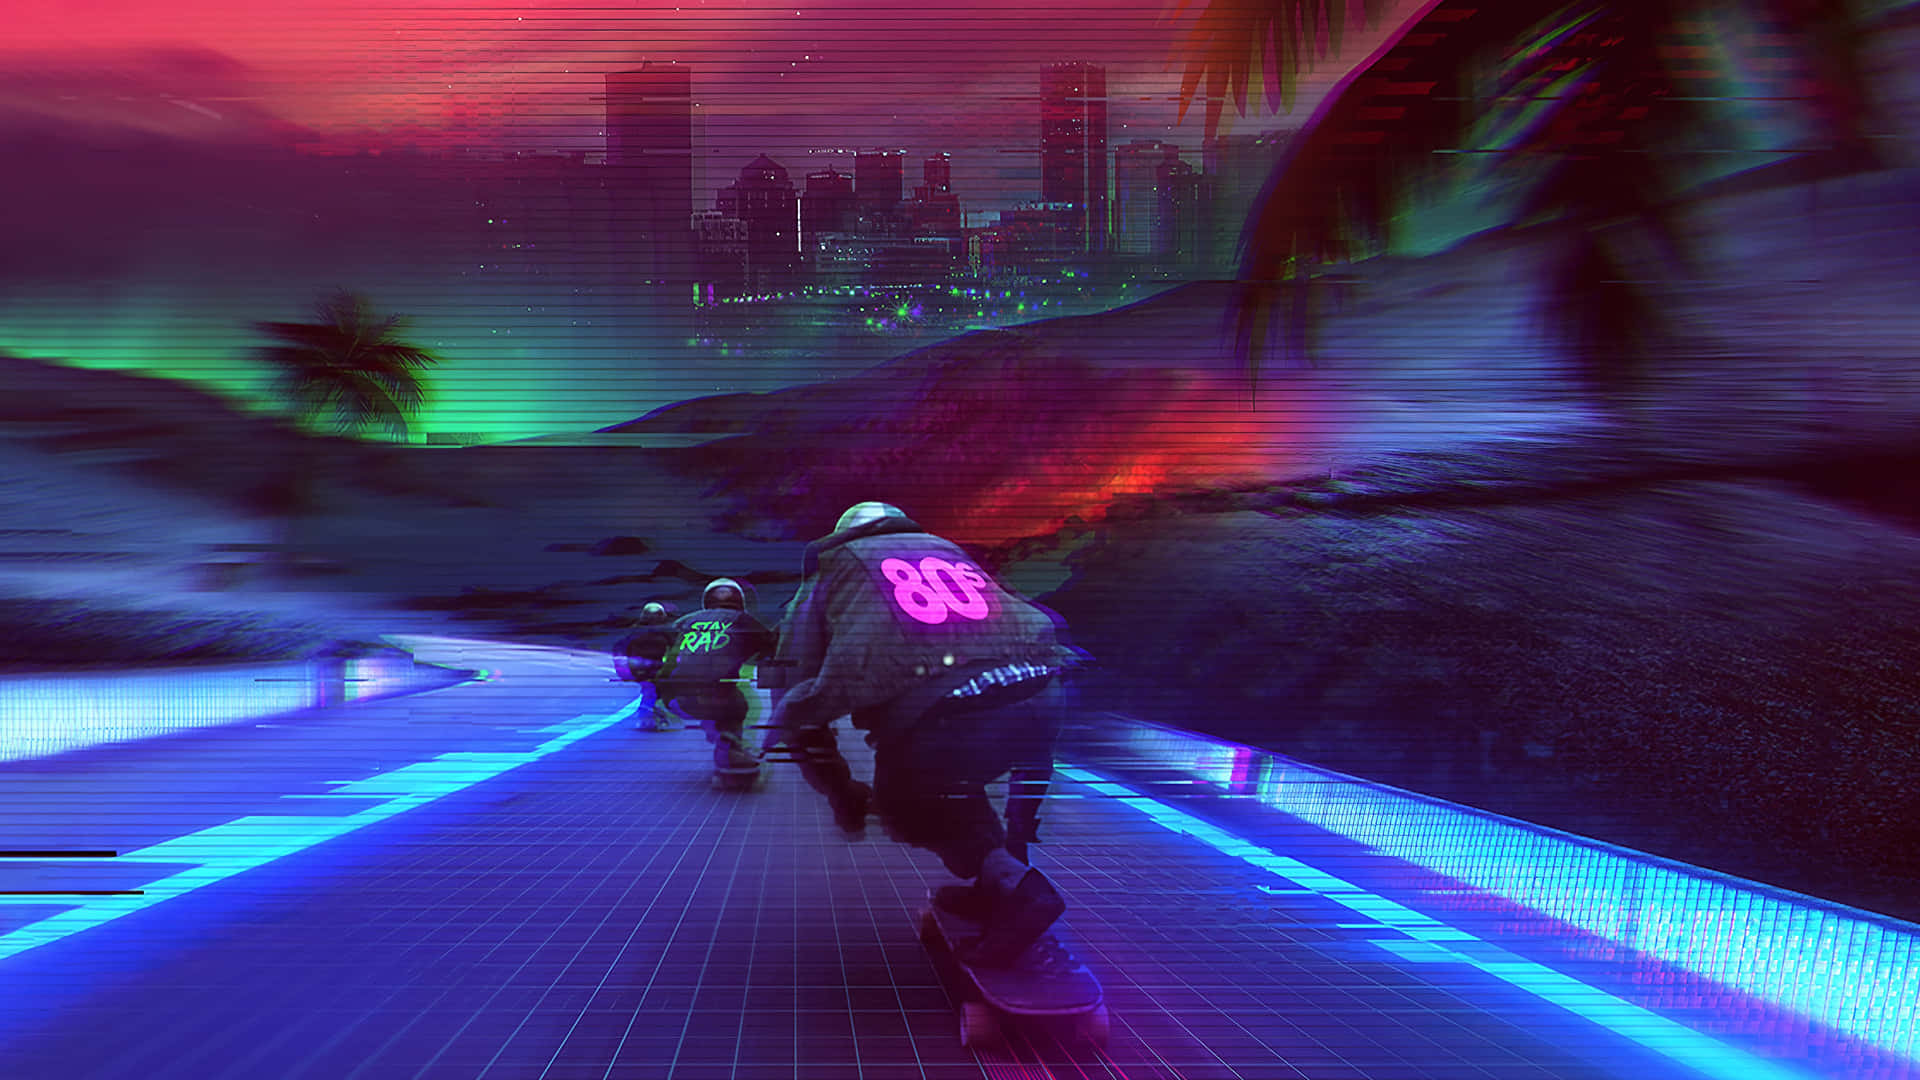 A Skateboarder Is Riding Down A Road With Neon Lights Wallpaper